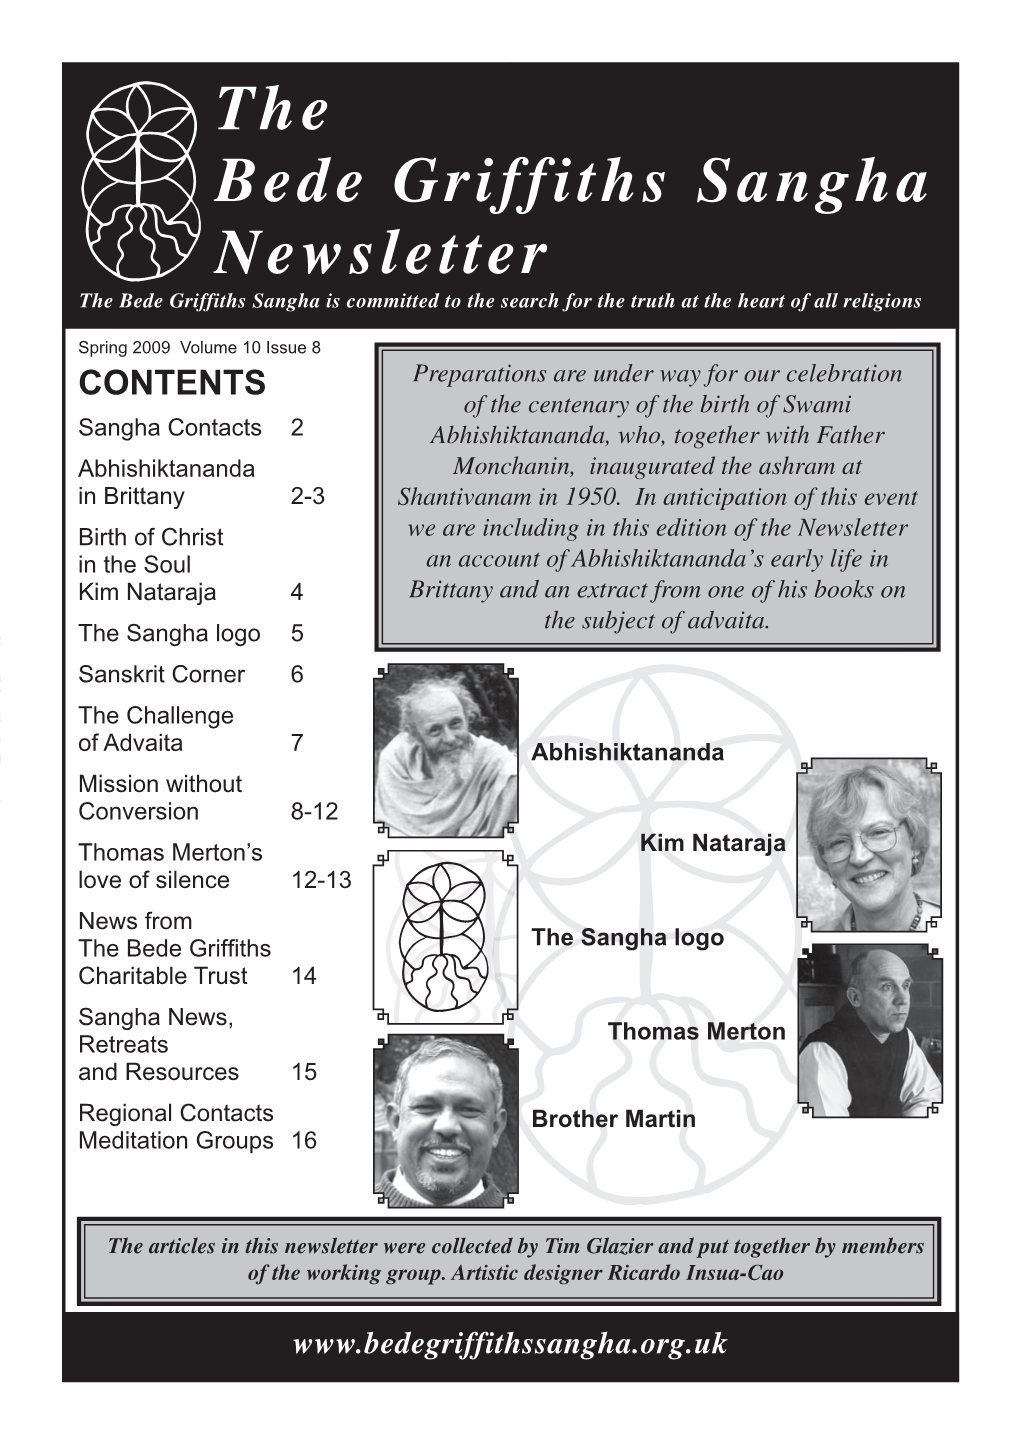 The Bede Griffiths Sangha Newsletter